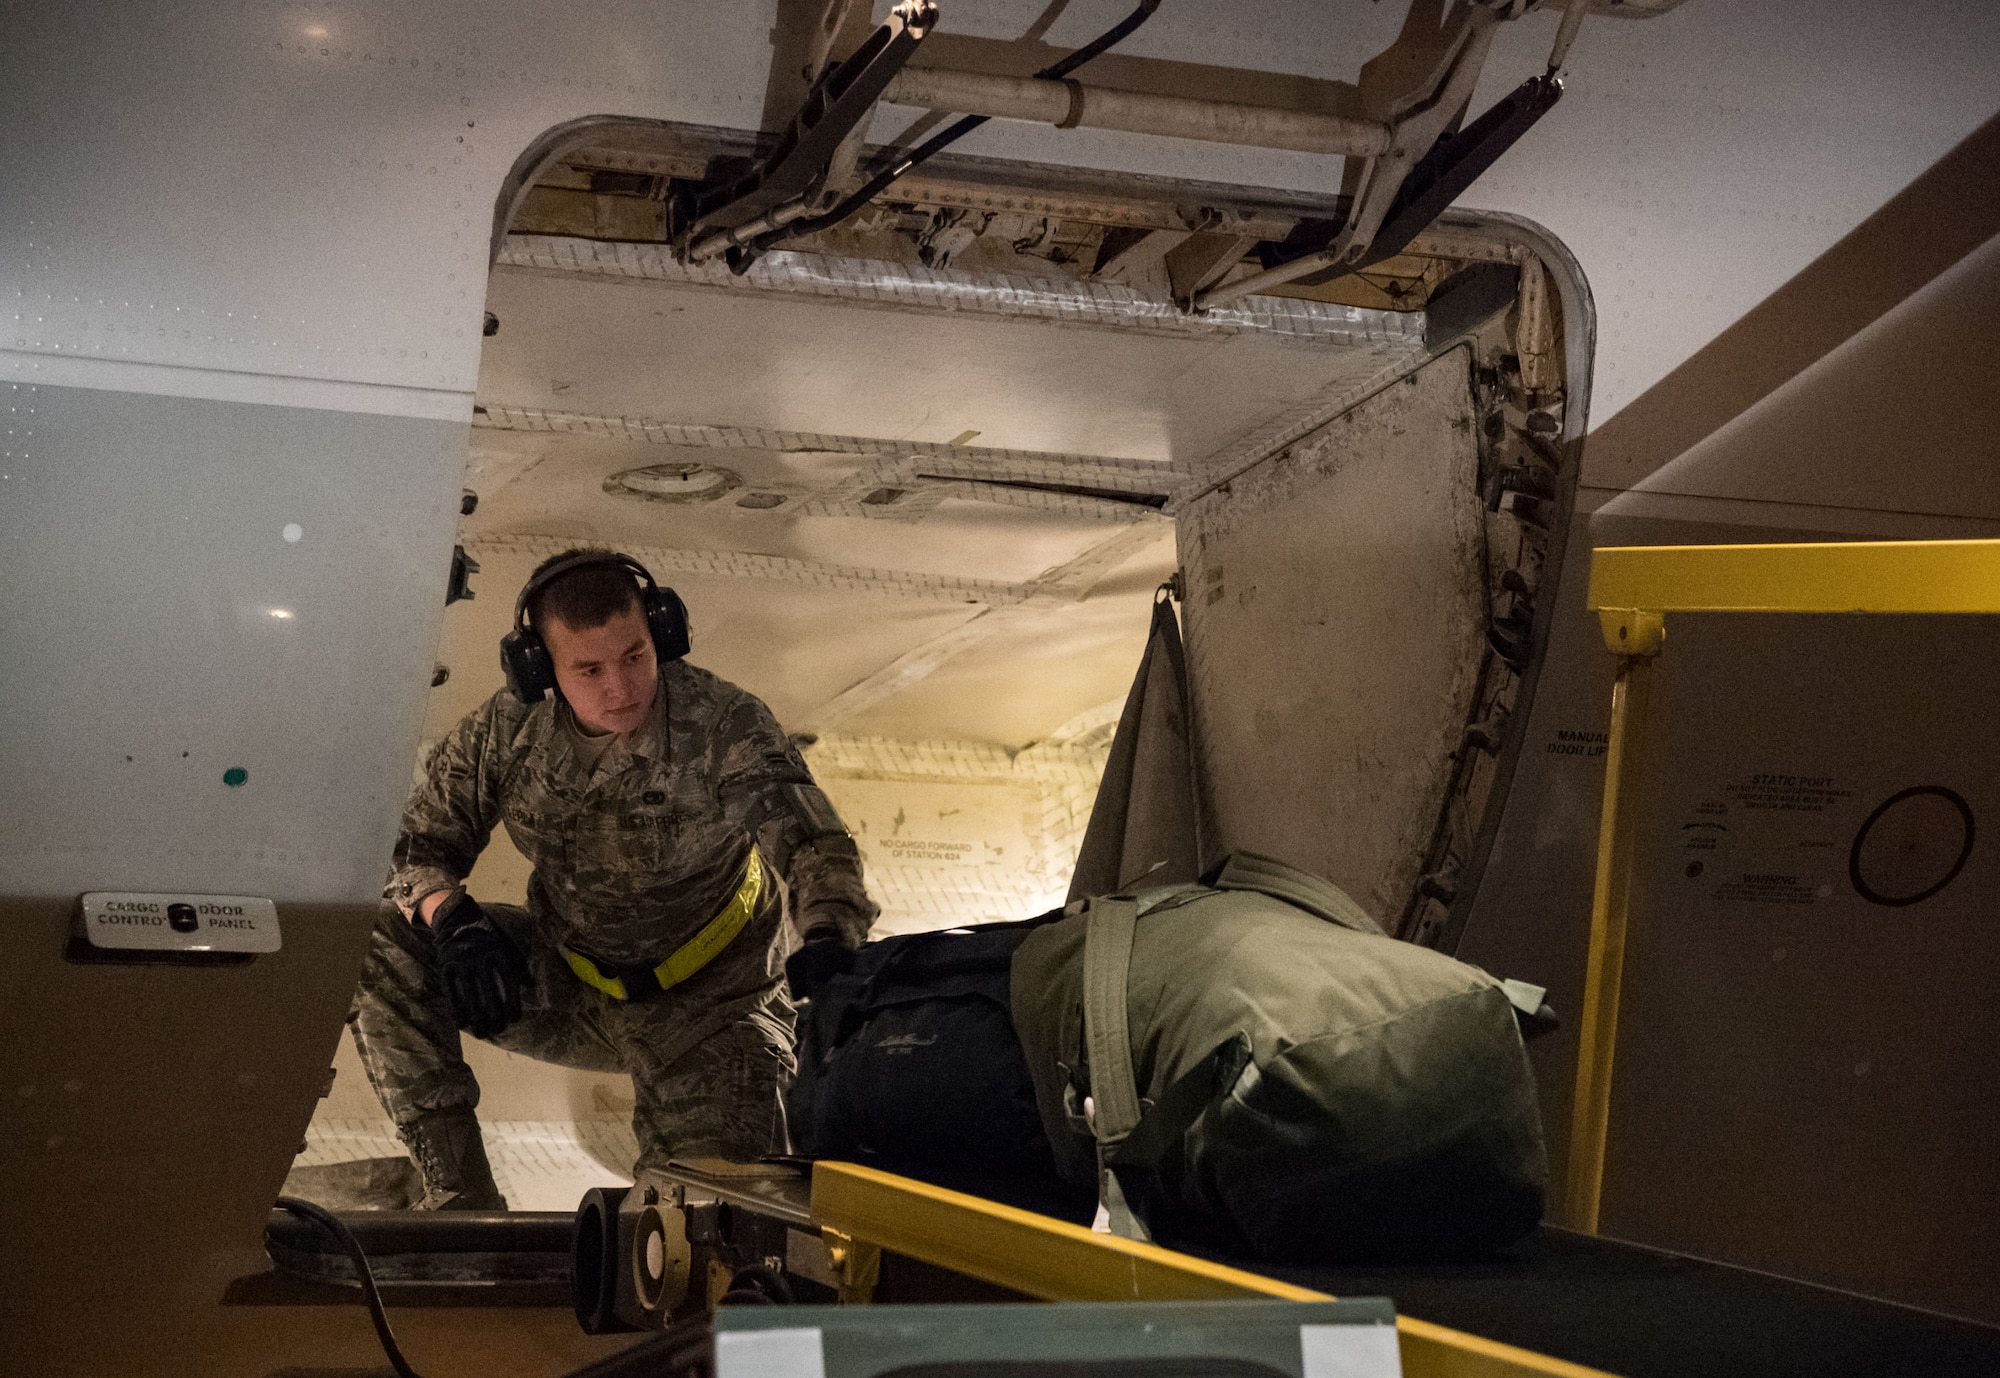 Airman 1st Class Justin Lepla, 436th Aerial Port Squadron passenger services specialist, loads baggage into the lower cargo hold of an Air Transport International Boeing 757-200 Sept. 8, 2019, at Dover Air Force Base, Del. The ATI aircraft, part of the Civil Reserve Air Fleet program, was contracted to transport cargo pallets and 30 Team Dover members to Fairchild AFB, Wash., participating in Mobility Guardian 2019. “In support of exercise Mobility Guardian 2019, Air Mobility Command contracted commercial aircraft to simulate activating CRAF marking the first time, in a long time, AMC has exercised a commercial component of its wartime plan,” said Maj. Adam Crane, AMC Headquarters CRAF Branch Chief, Scott AFB, Ill. (U.S. Air Force photo by Roland Balik)